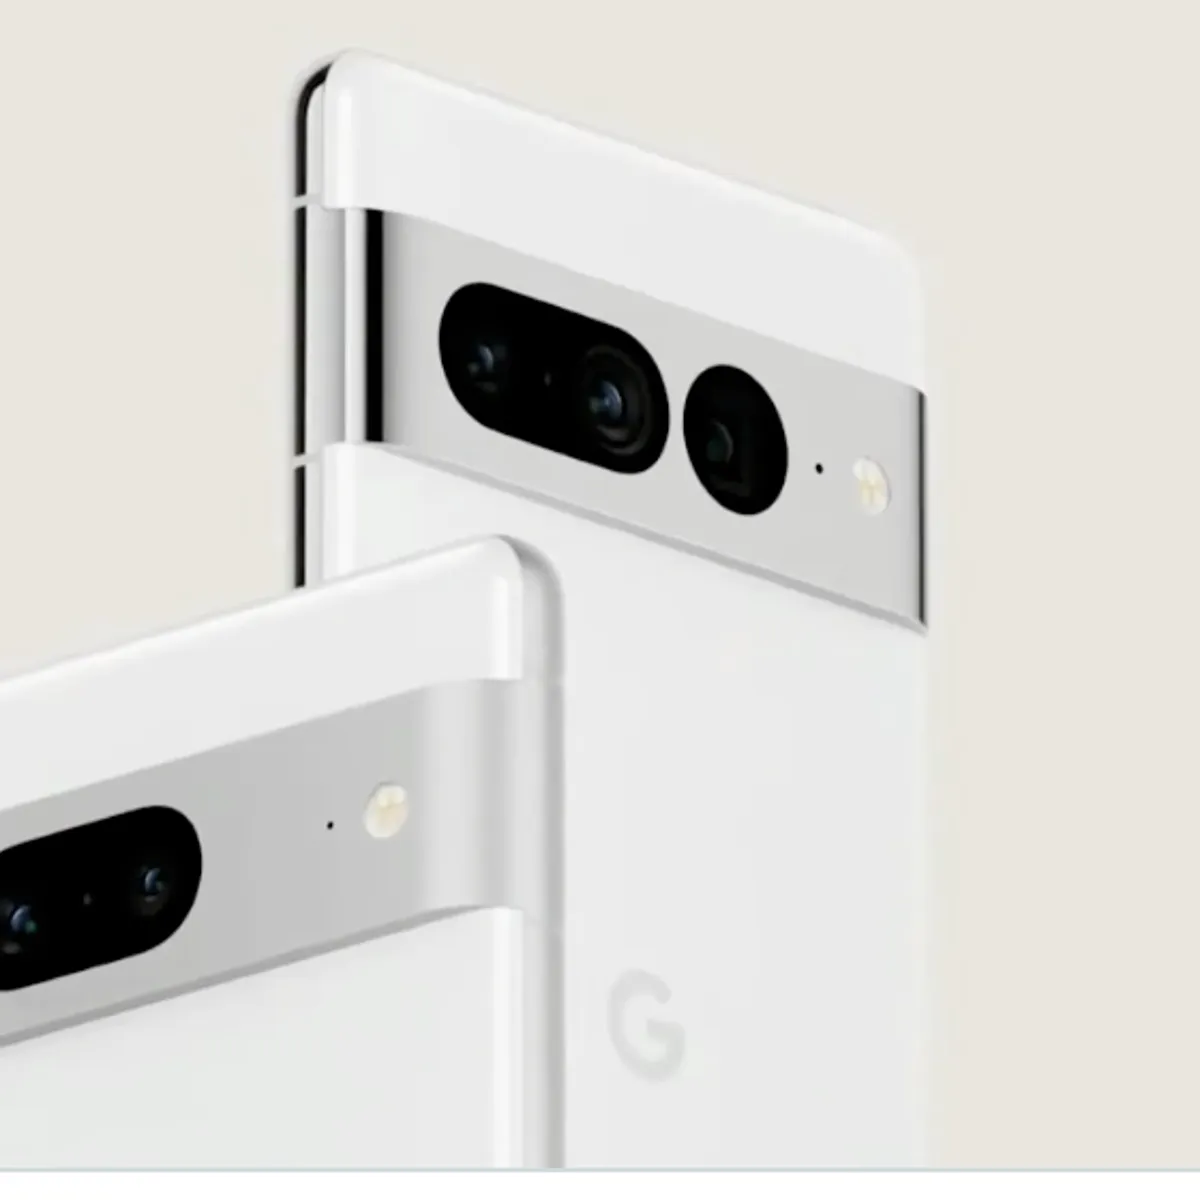 Google Pixel 6 Pro - Price in India, Specifications & Features